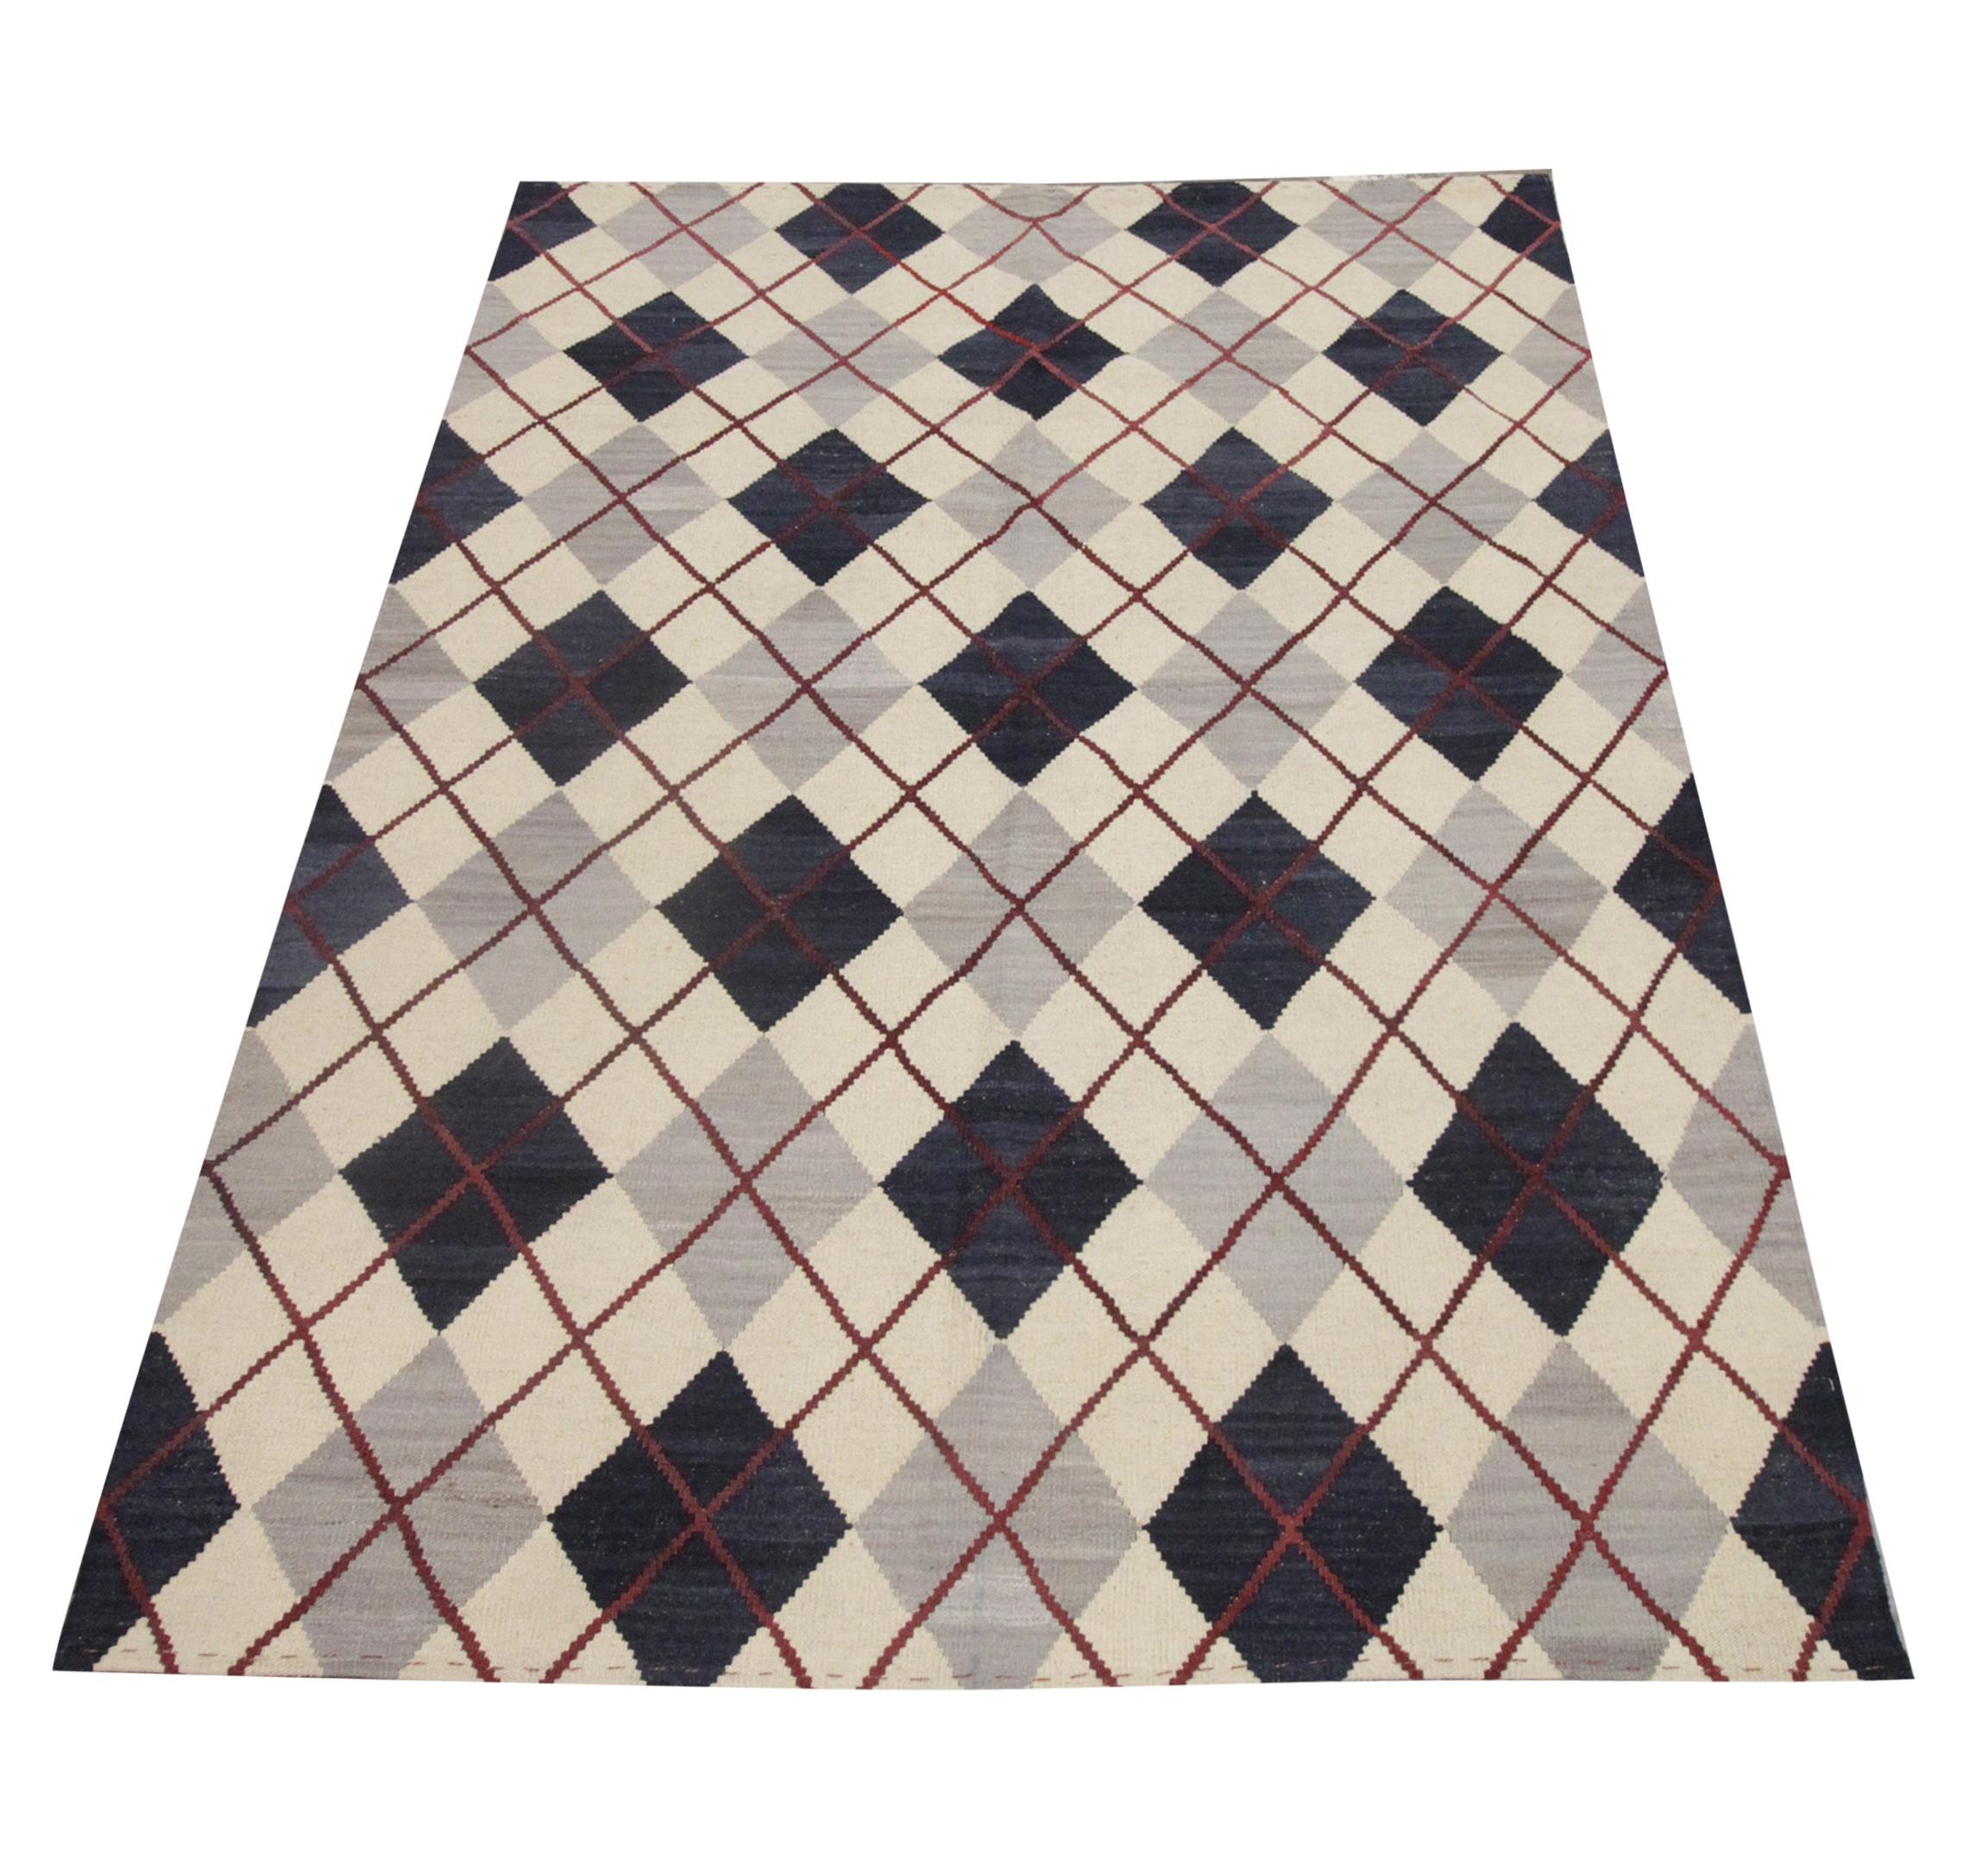 This fine wool Kilim is a handwoven area rug constructed in Afghanistan in the early 2000s. The design features a bold repeating geometric diamond pattern woven in grey, blue, and red accents on a simple cream background. The elegantly modern design